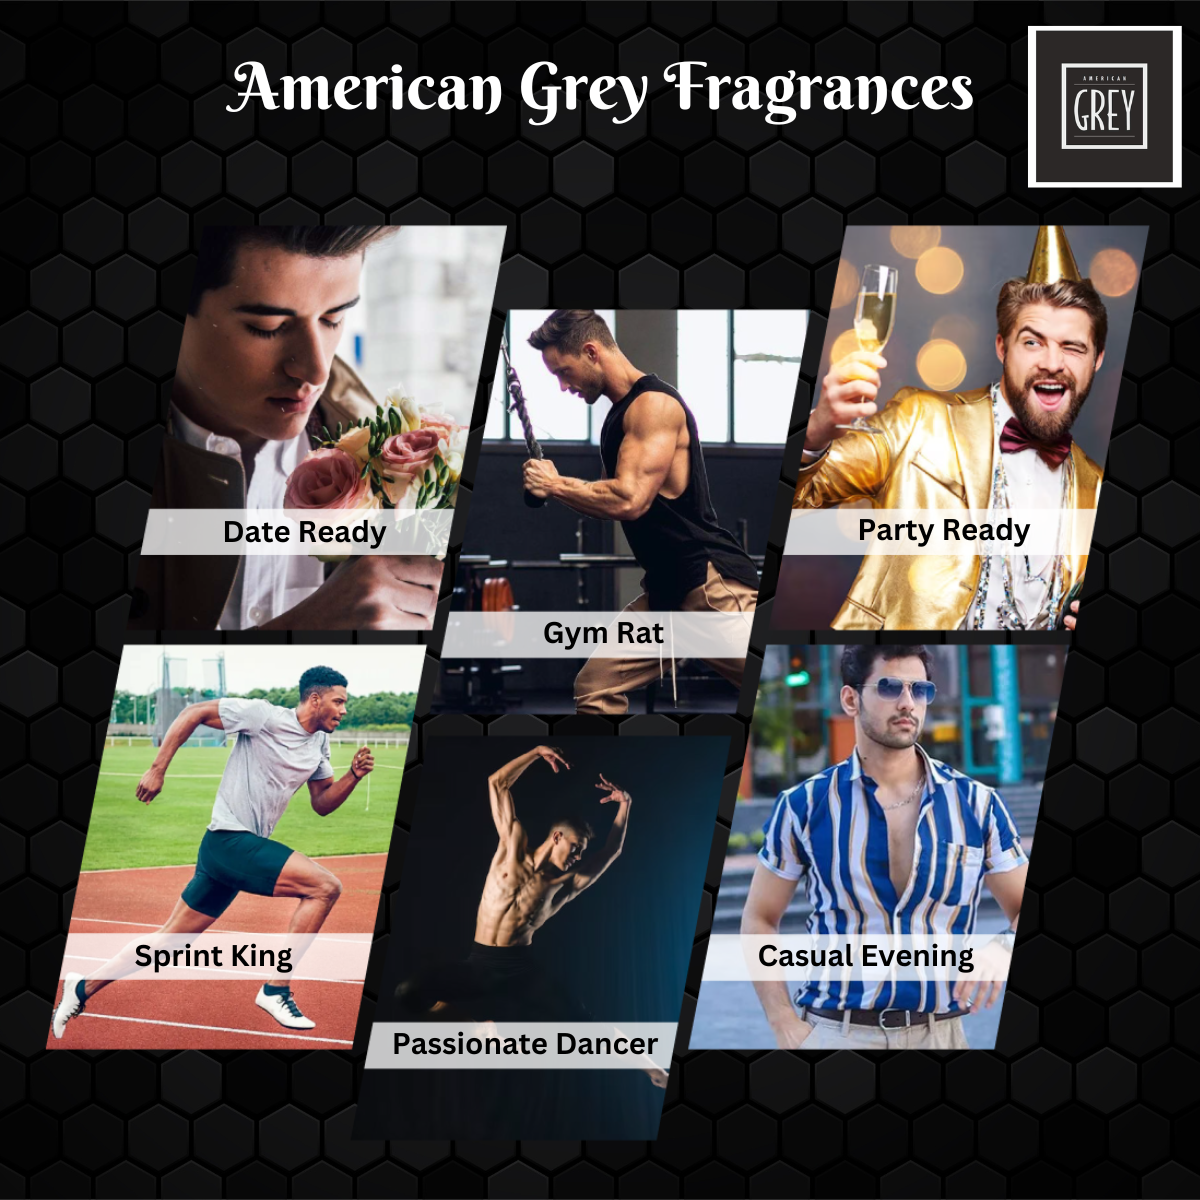 be date ready with american grey perfume spray, be party ready with american grey deo spray, grooming routine for men, best party deo, best gym deo, long lasting deo for casual evenings, can I use deodorant anytime, when can u wear a deodorant, can I wear a deo in morning, best time to apply deo, best time to apply american grey deo, american grey deo, top men deo brand in india, musk smelling deo,  top rated mens deo, men grooming essential, men fragrance for winter season, best deo for cold weather, popular winter deodorant for men, best deo for winter season, best deo for winter season, casual evening wear for men